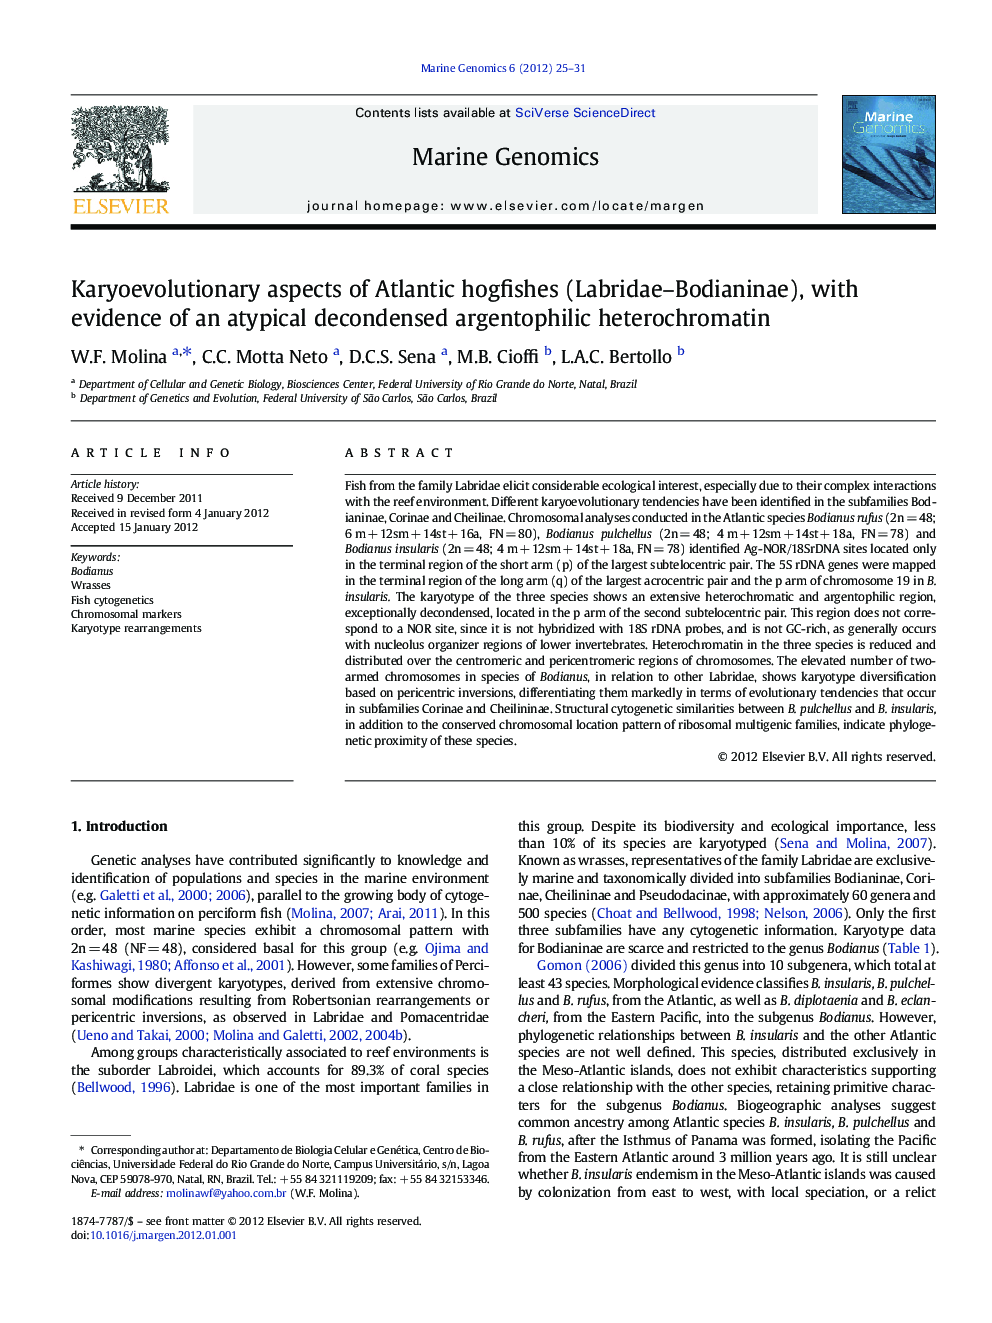 Karyoevolutionary aspects of Atlantic hogfishes (Labridae–Bodianinae), with evidence of an atypical decondensed argentophilic heterochromatin